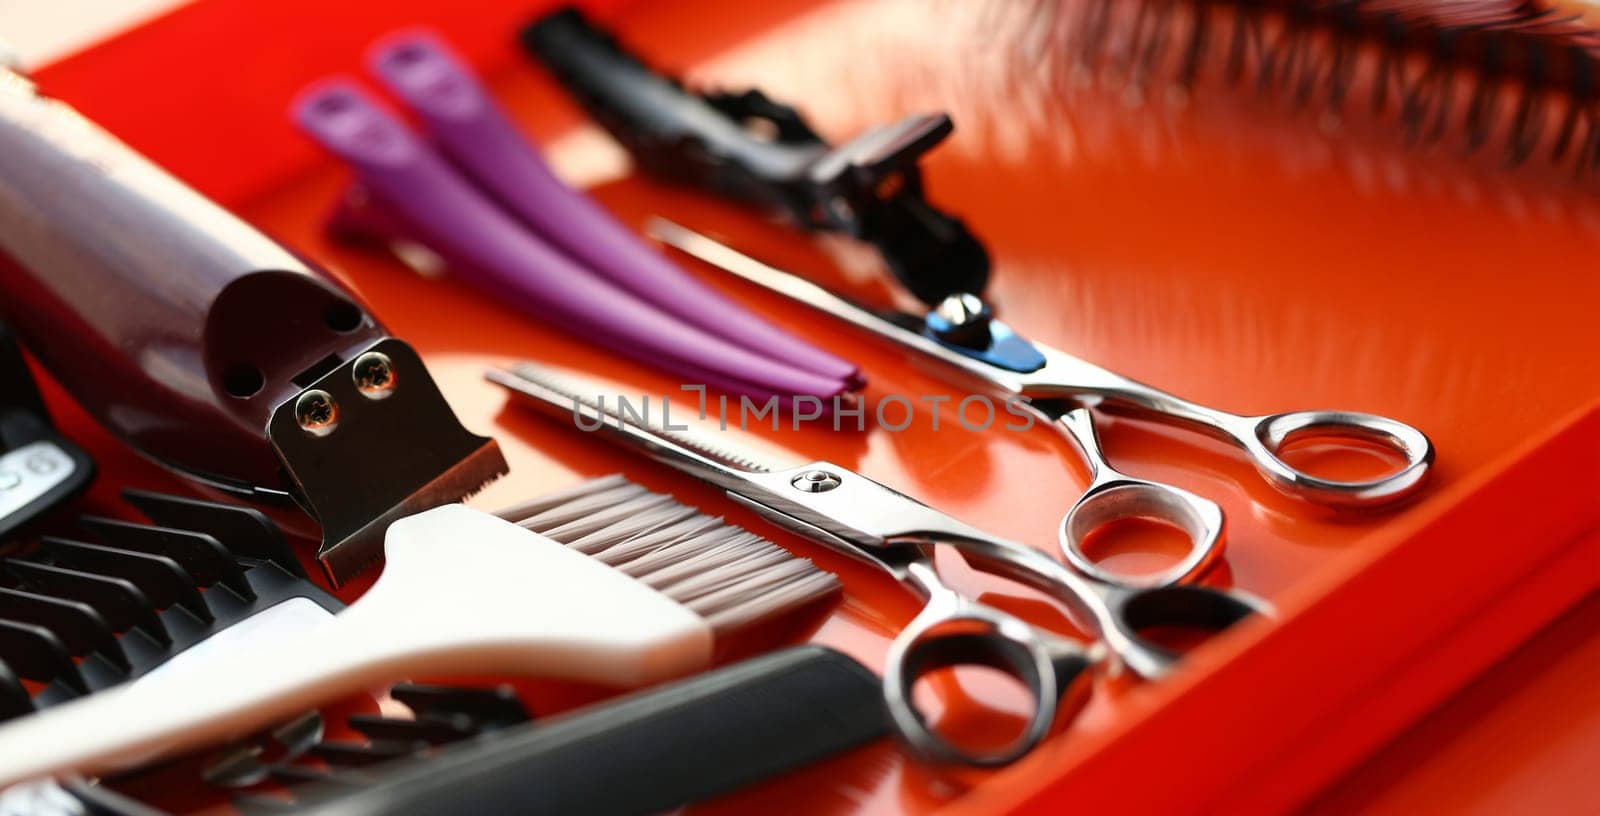 Scissors and Hairdresser Tool on Red Background by kuprevich